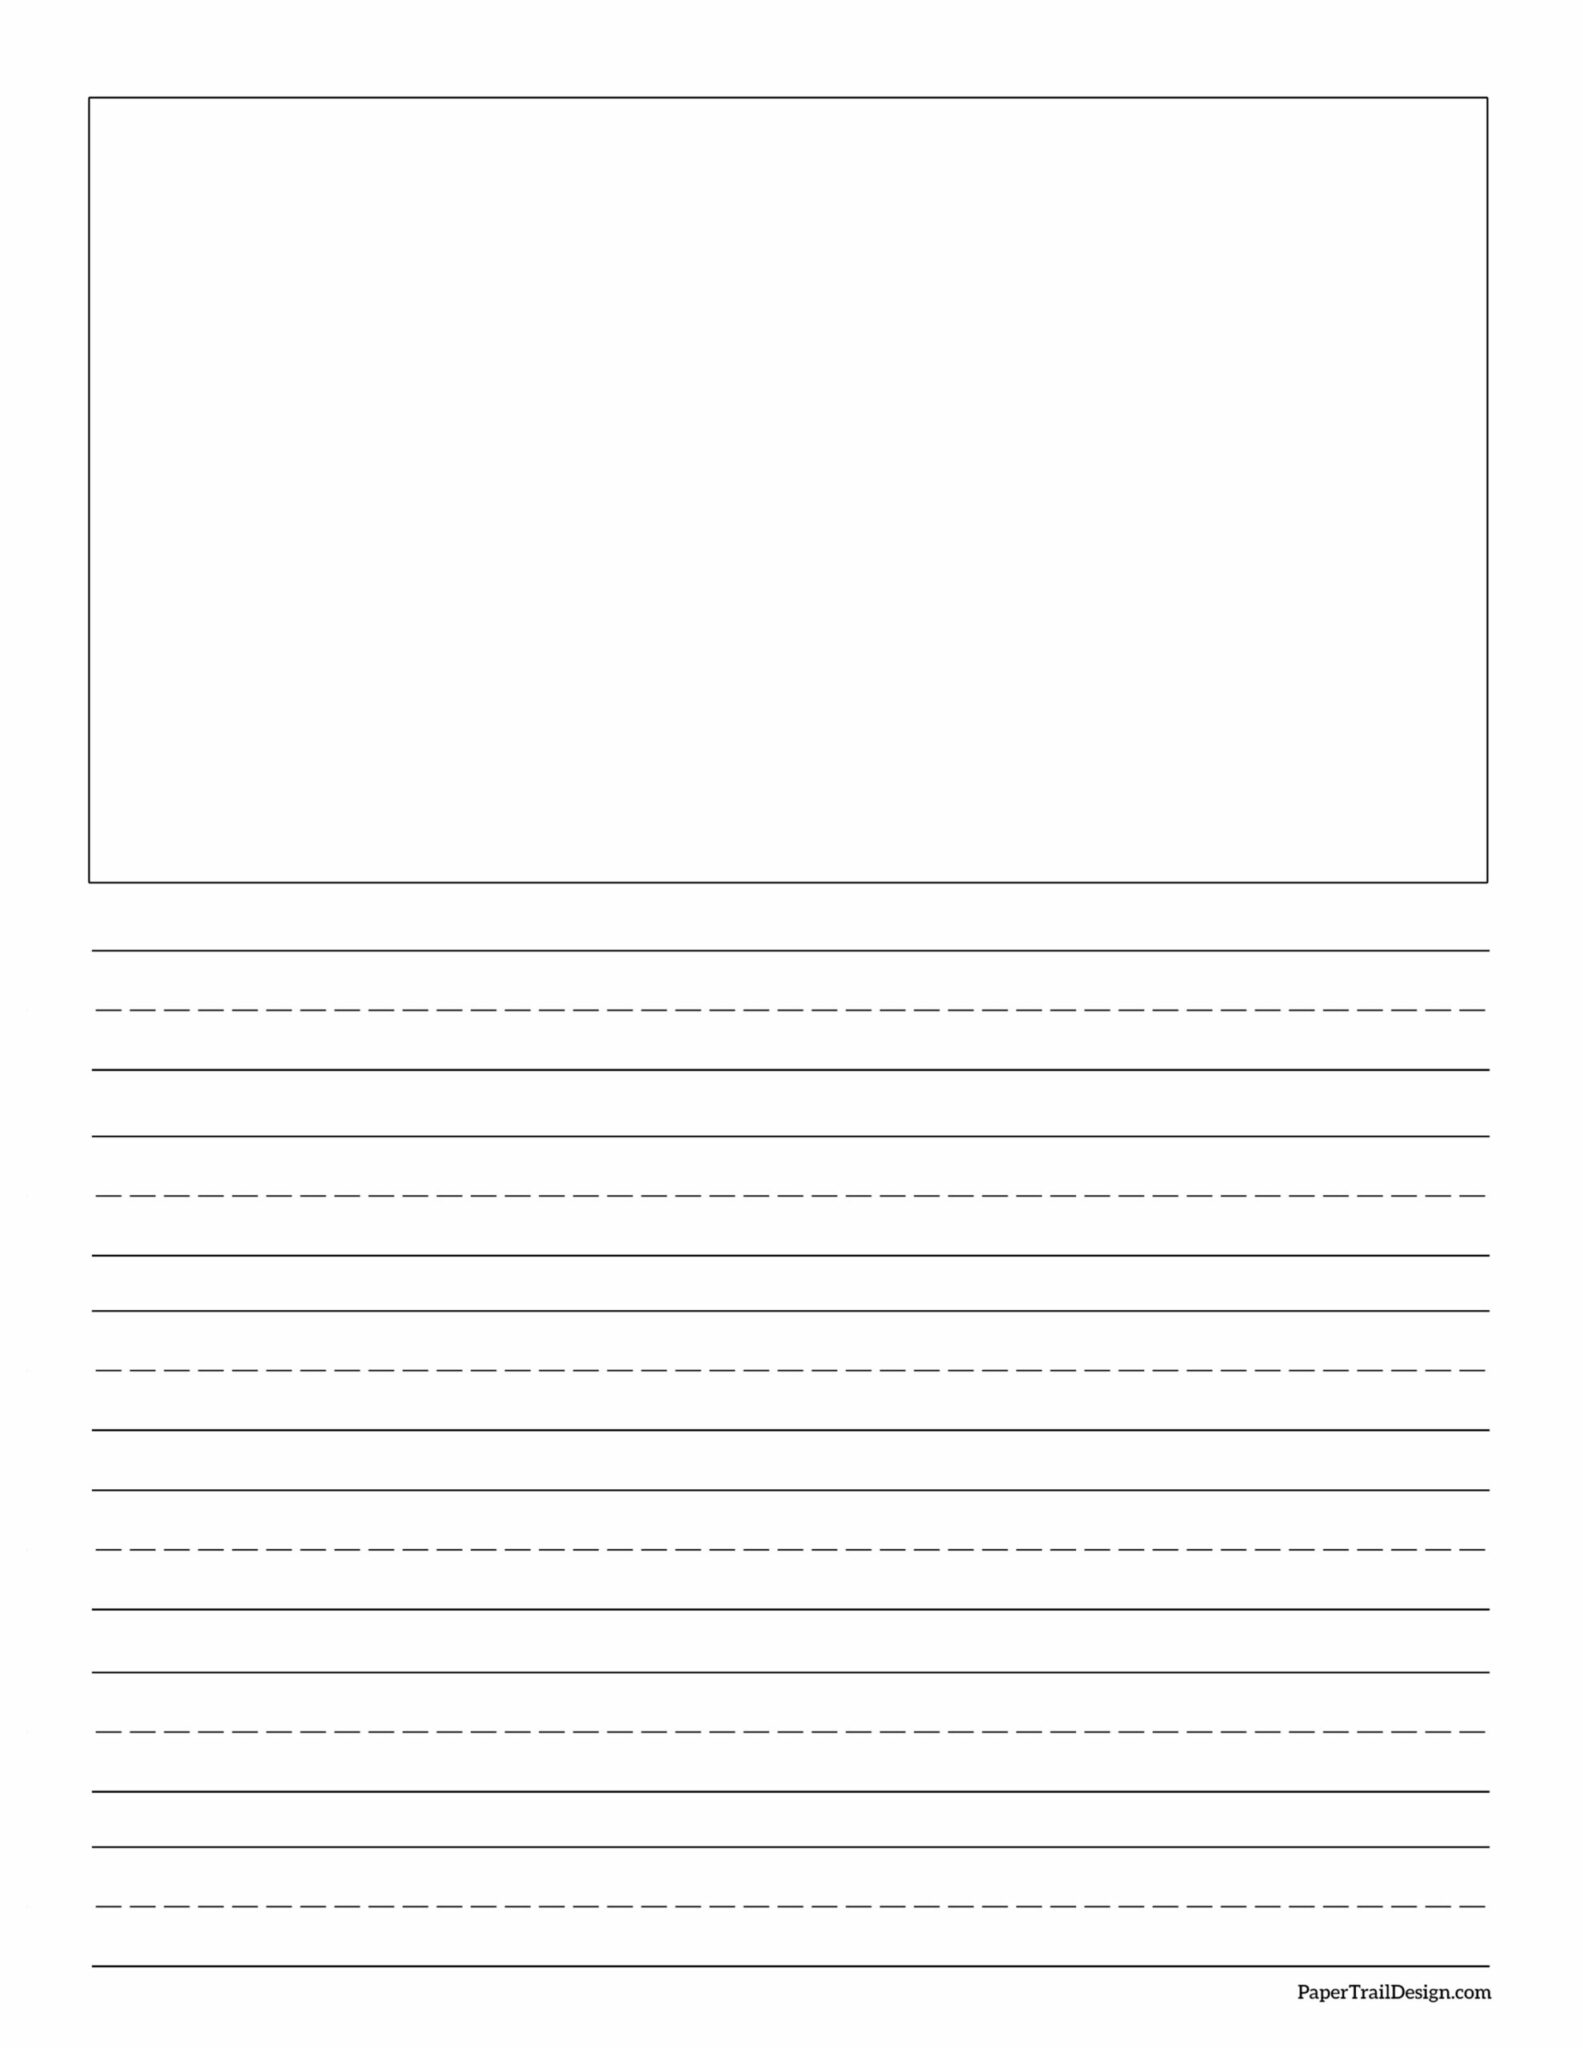 free-printable-lined-writing-paper-with-drawing-box-paper-trail-design